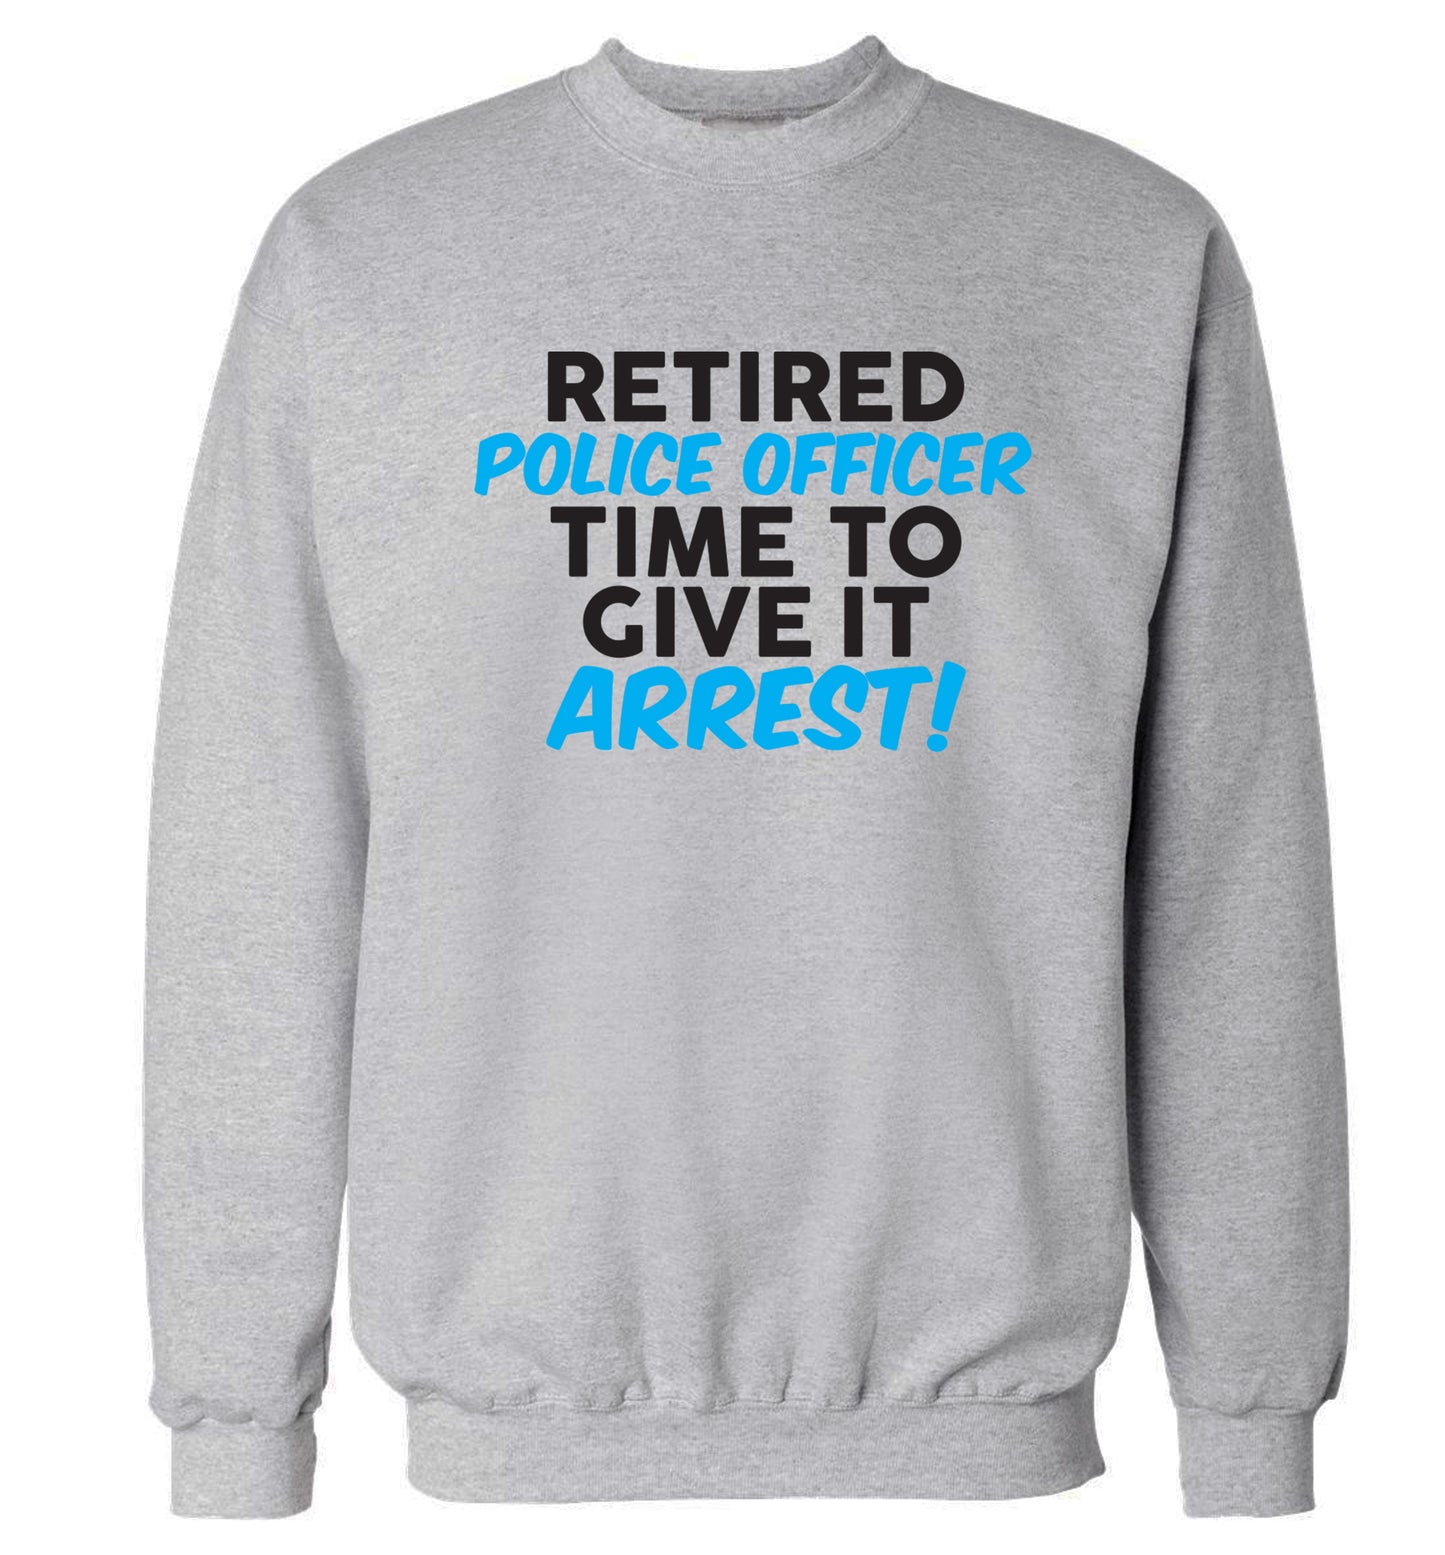 Retired police officer time to give it arrest Adult's unisex grey Sweater 2XL